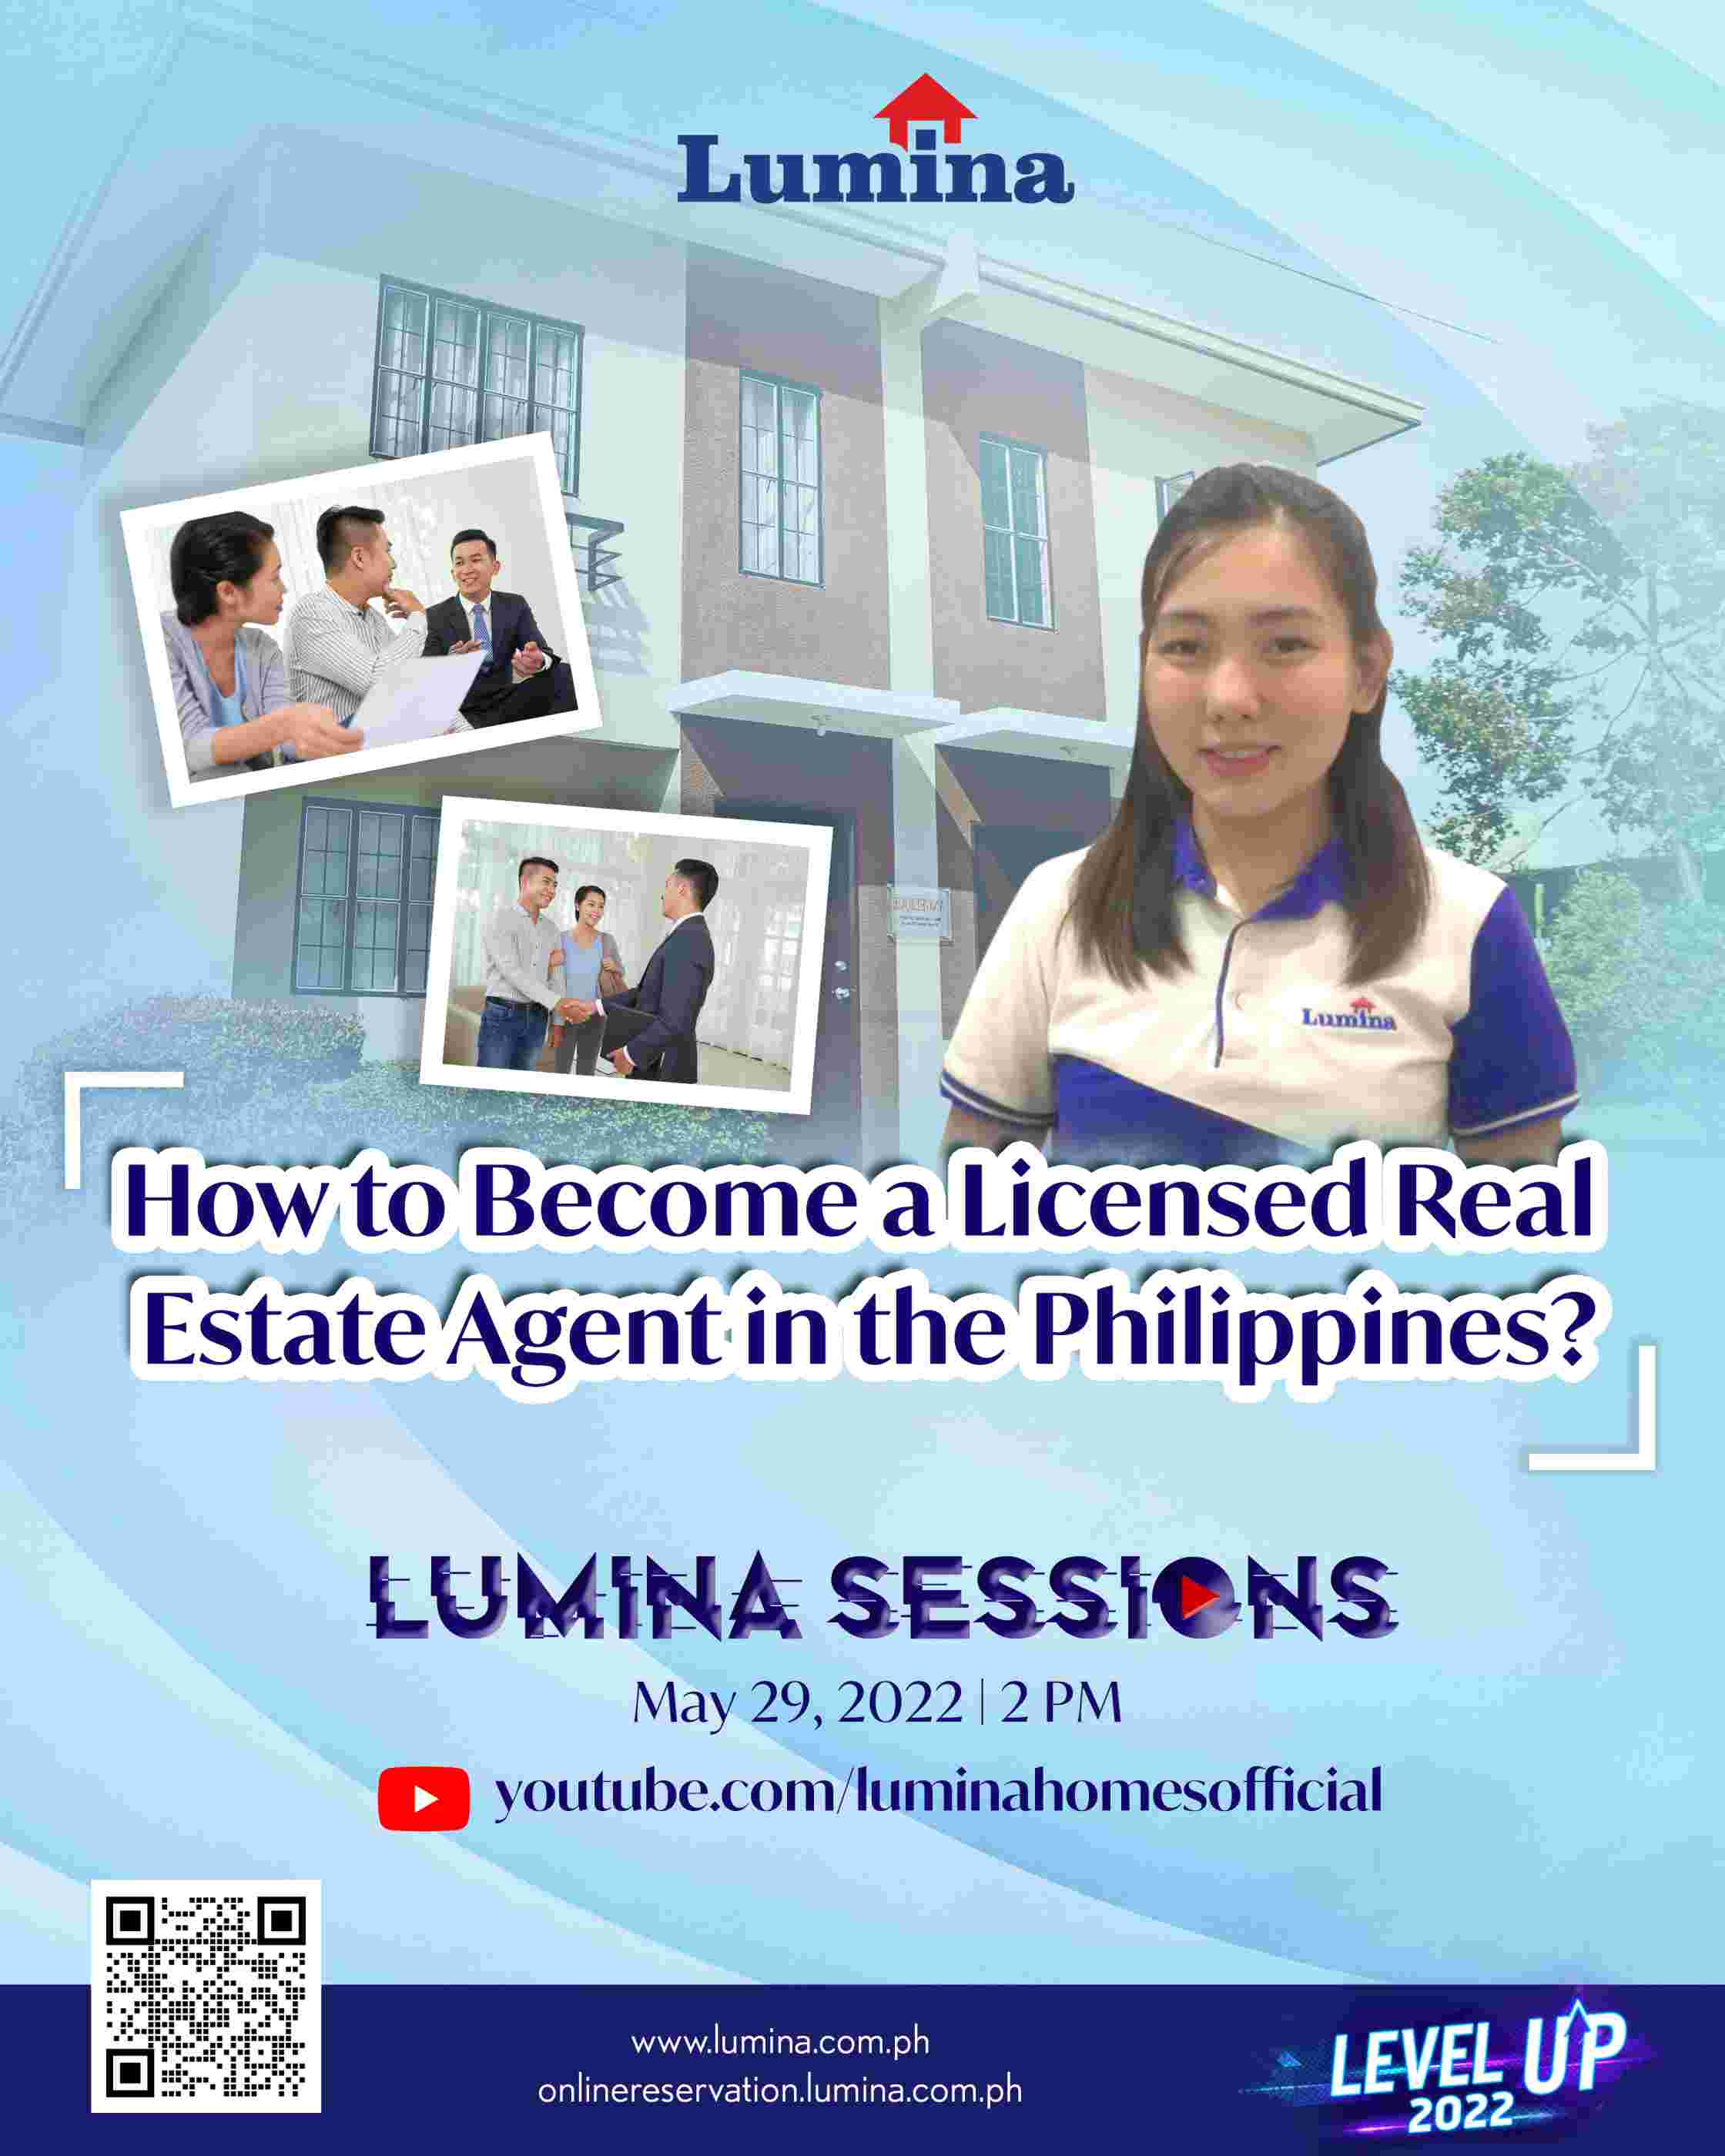 Lumina Sessions How to Become a Licensed Real Estate Agent in the Philippines